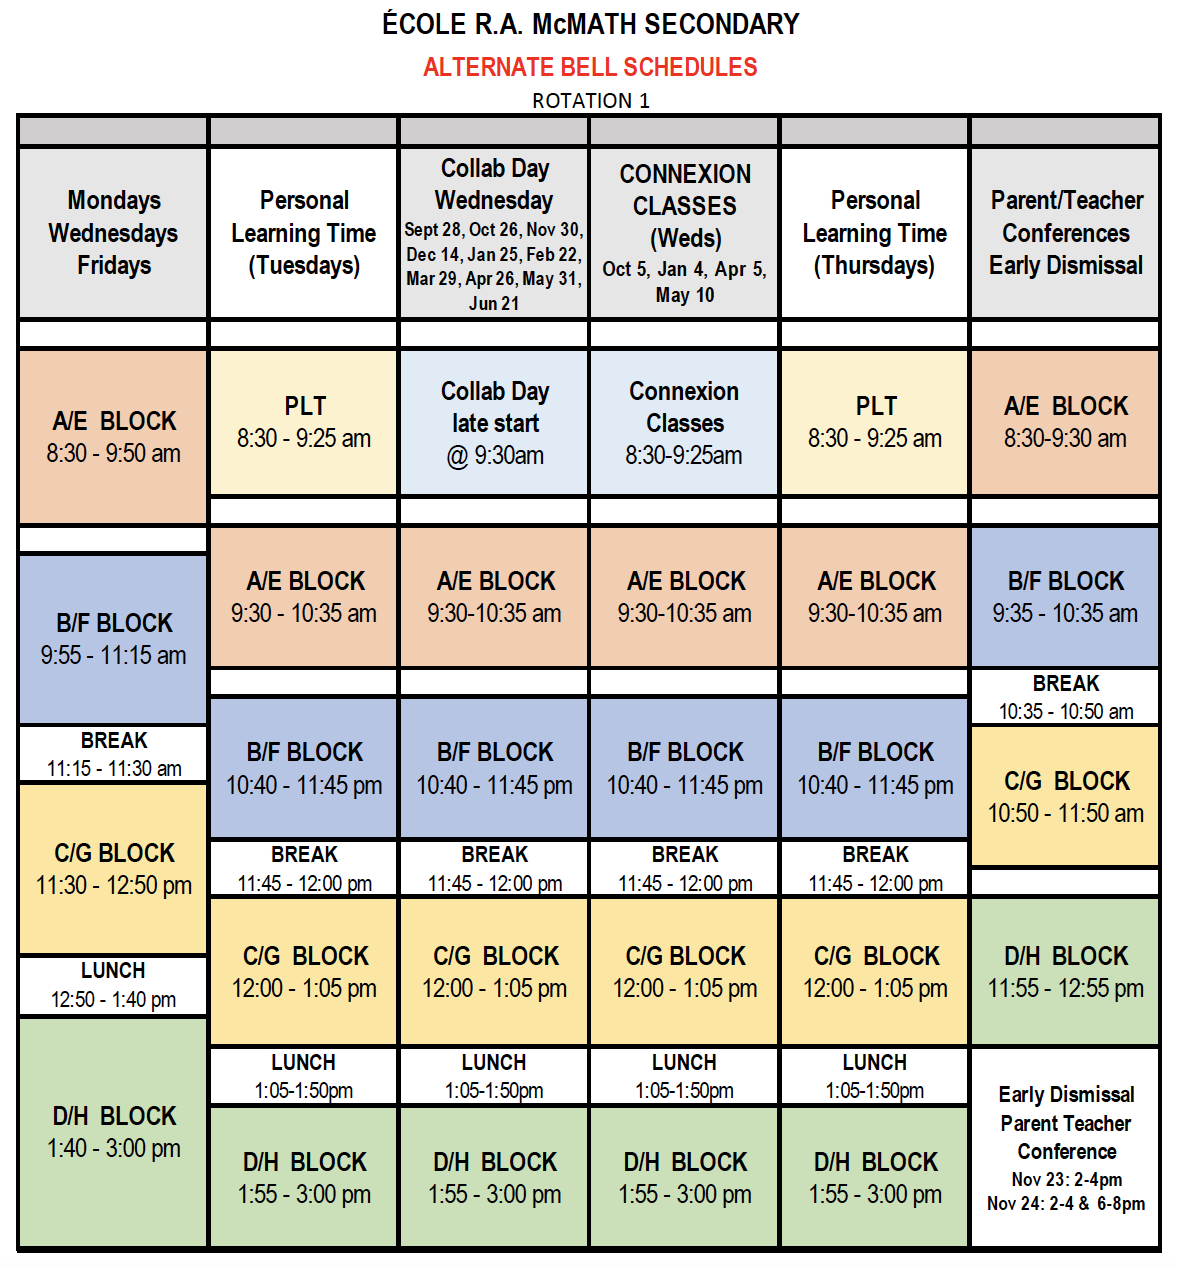 Bell Schedule Rotation 1